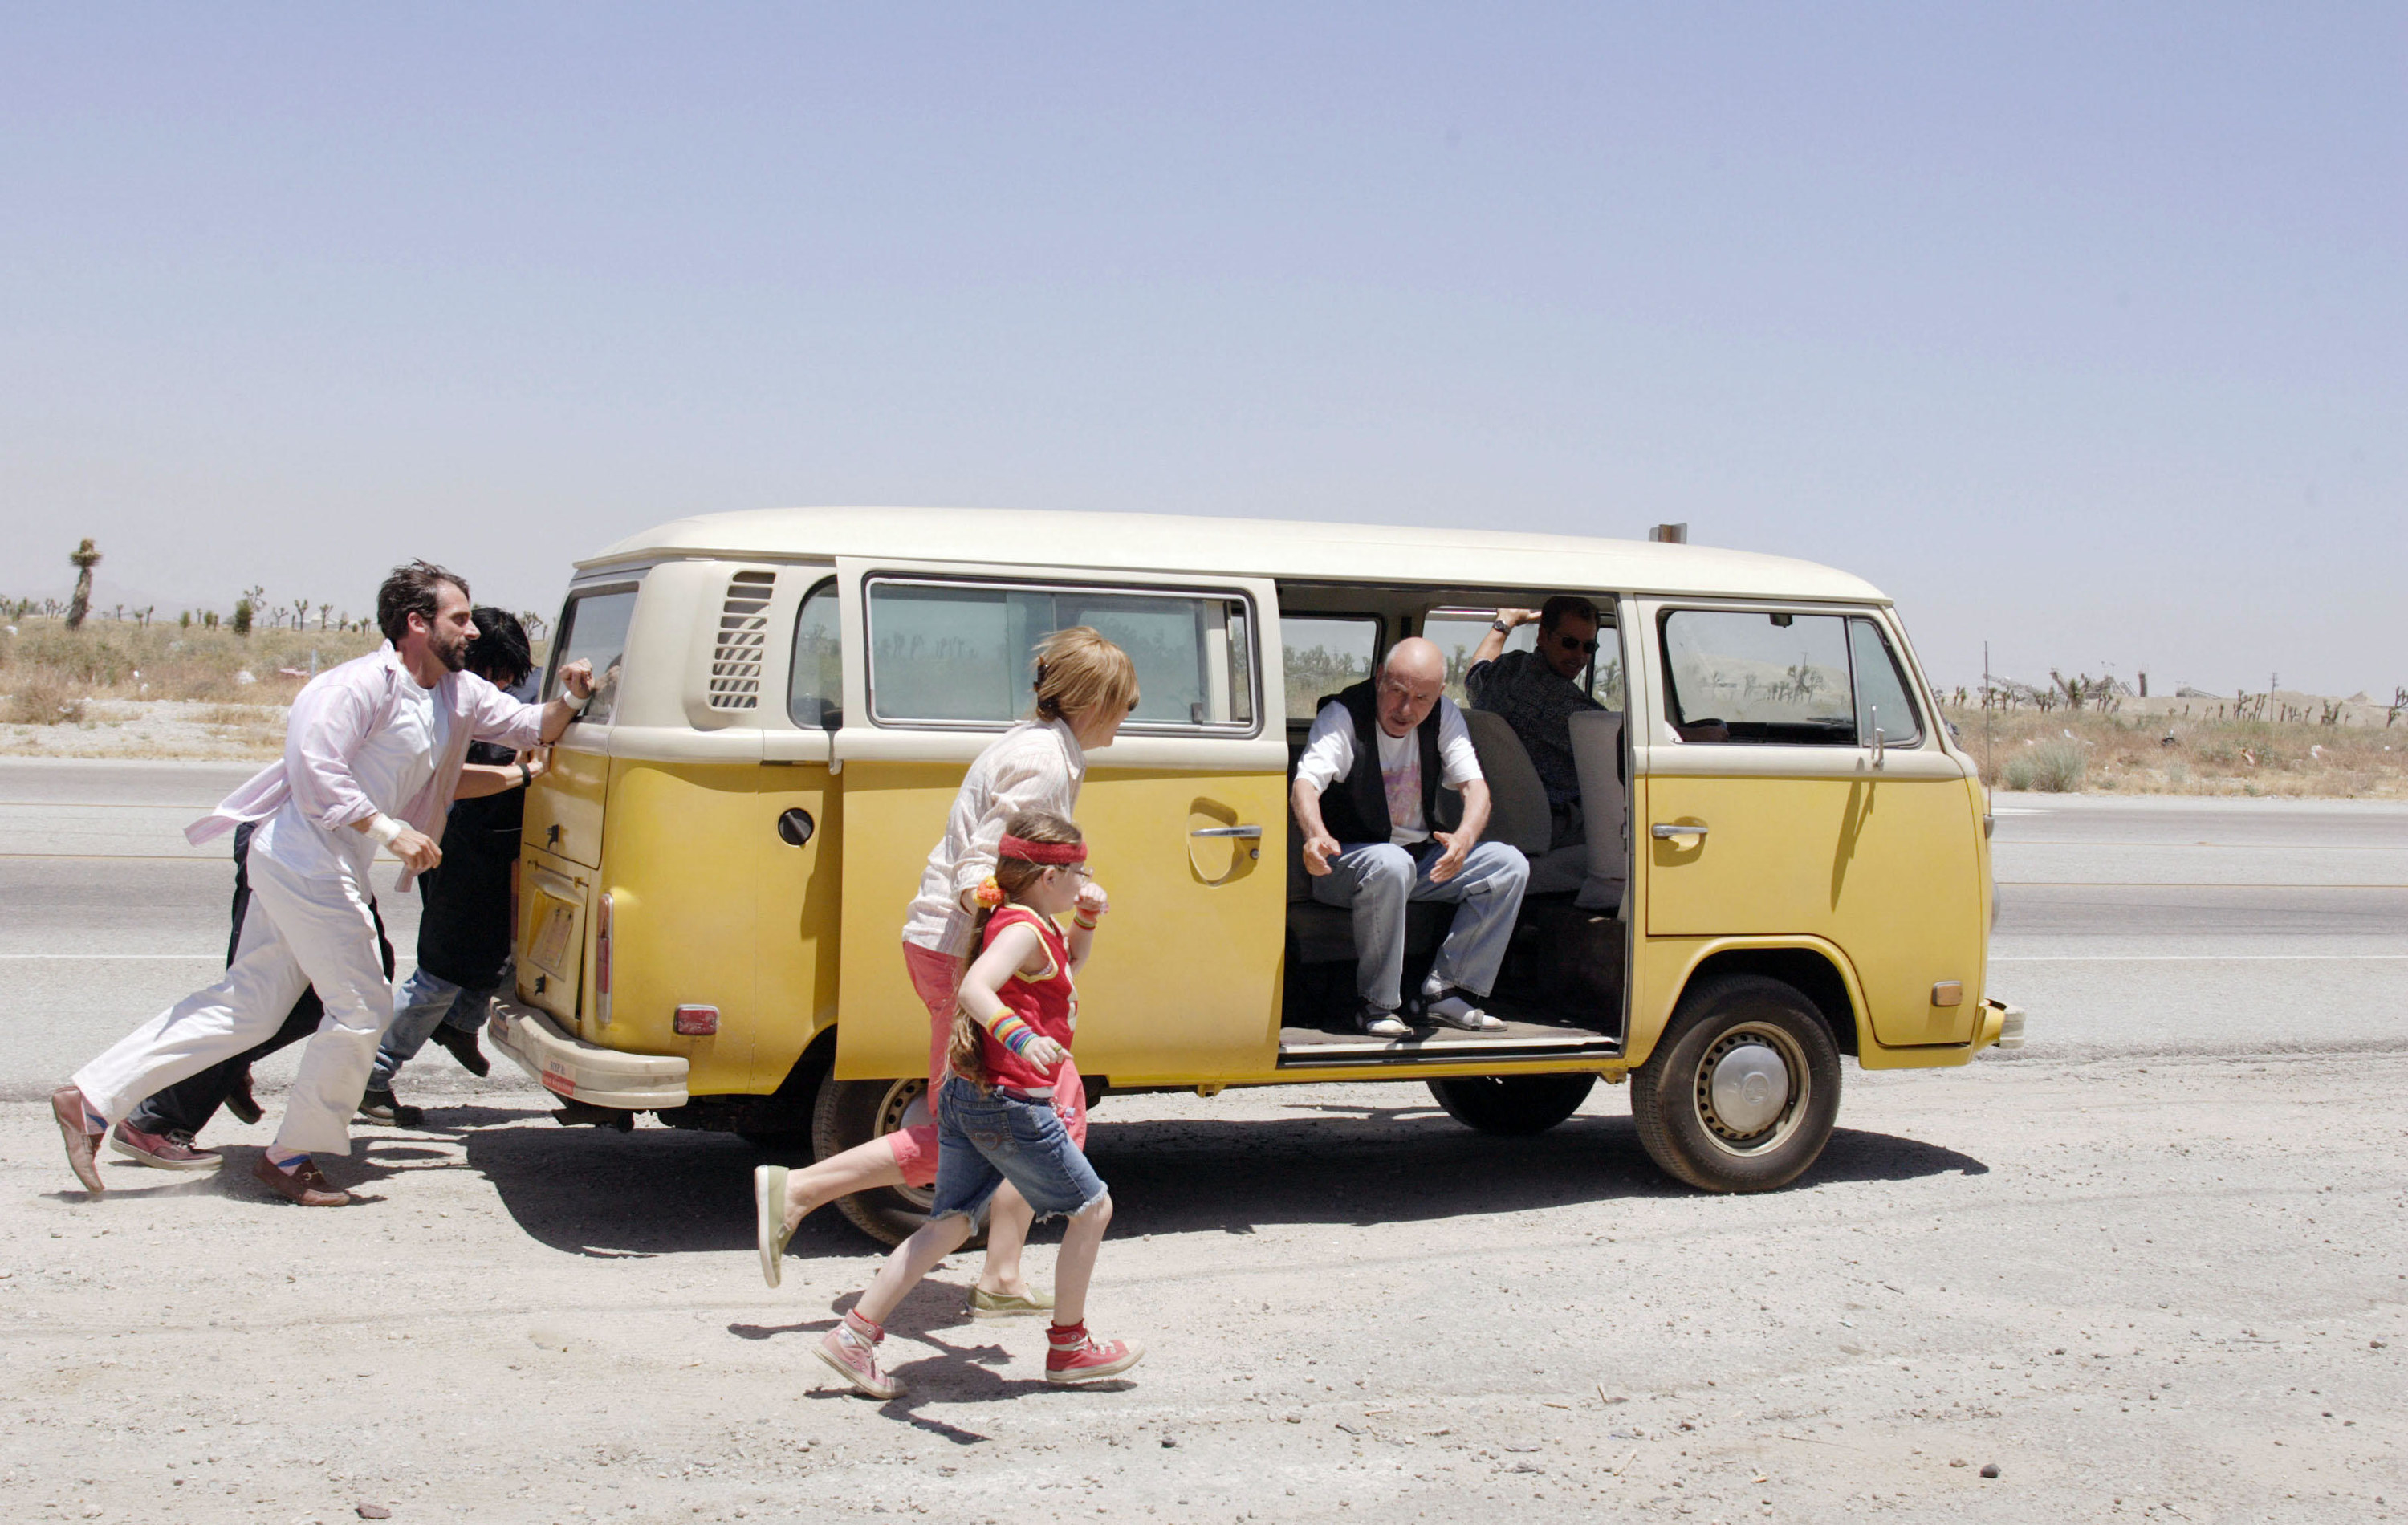 the cast of little miss sunshine chasing their yellow and white van through the desert